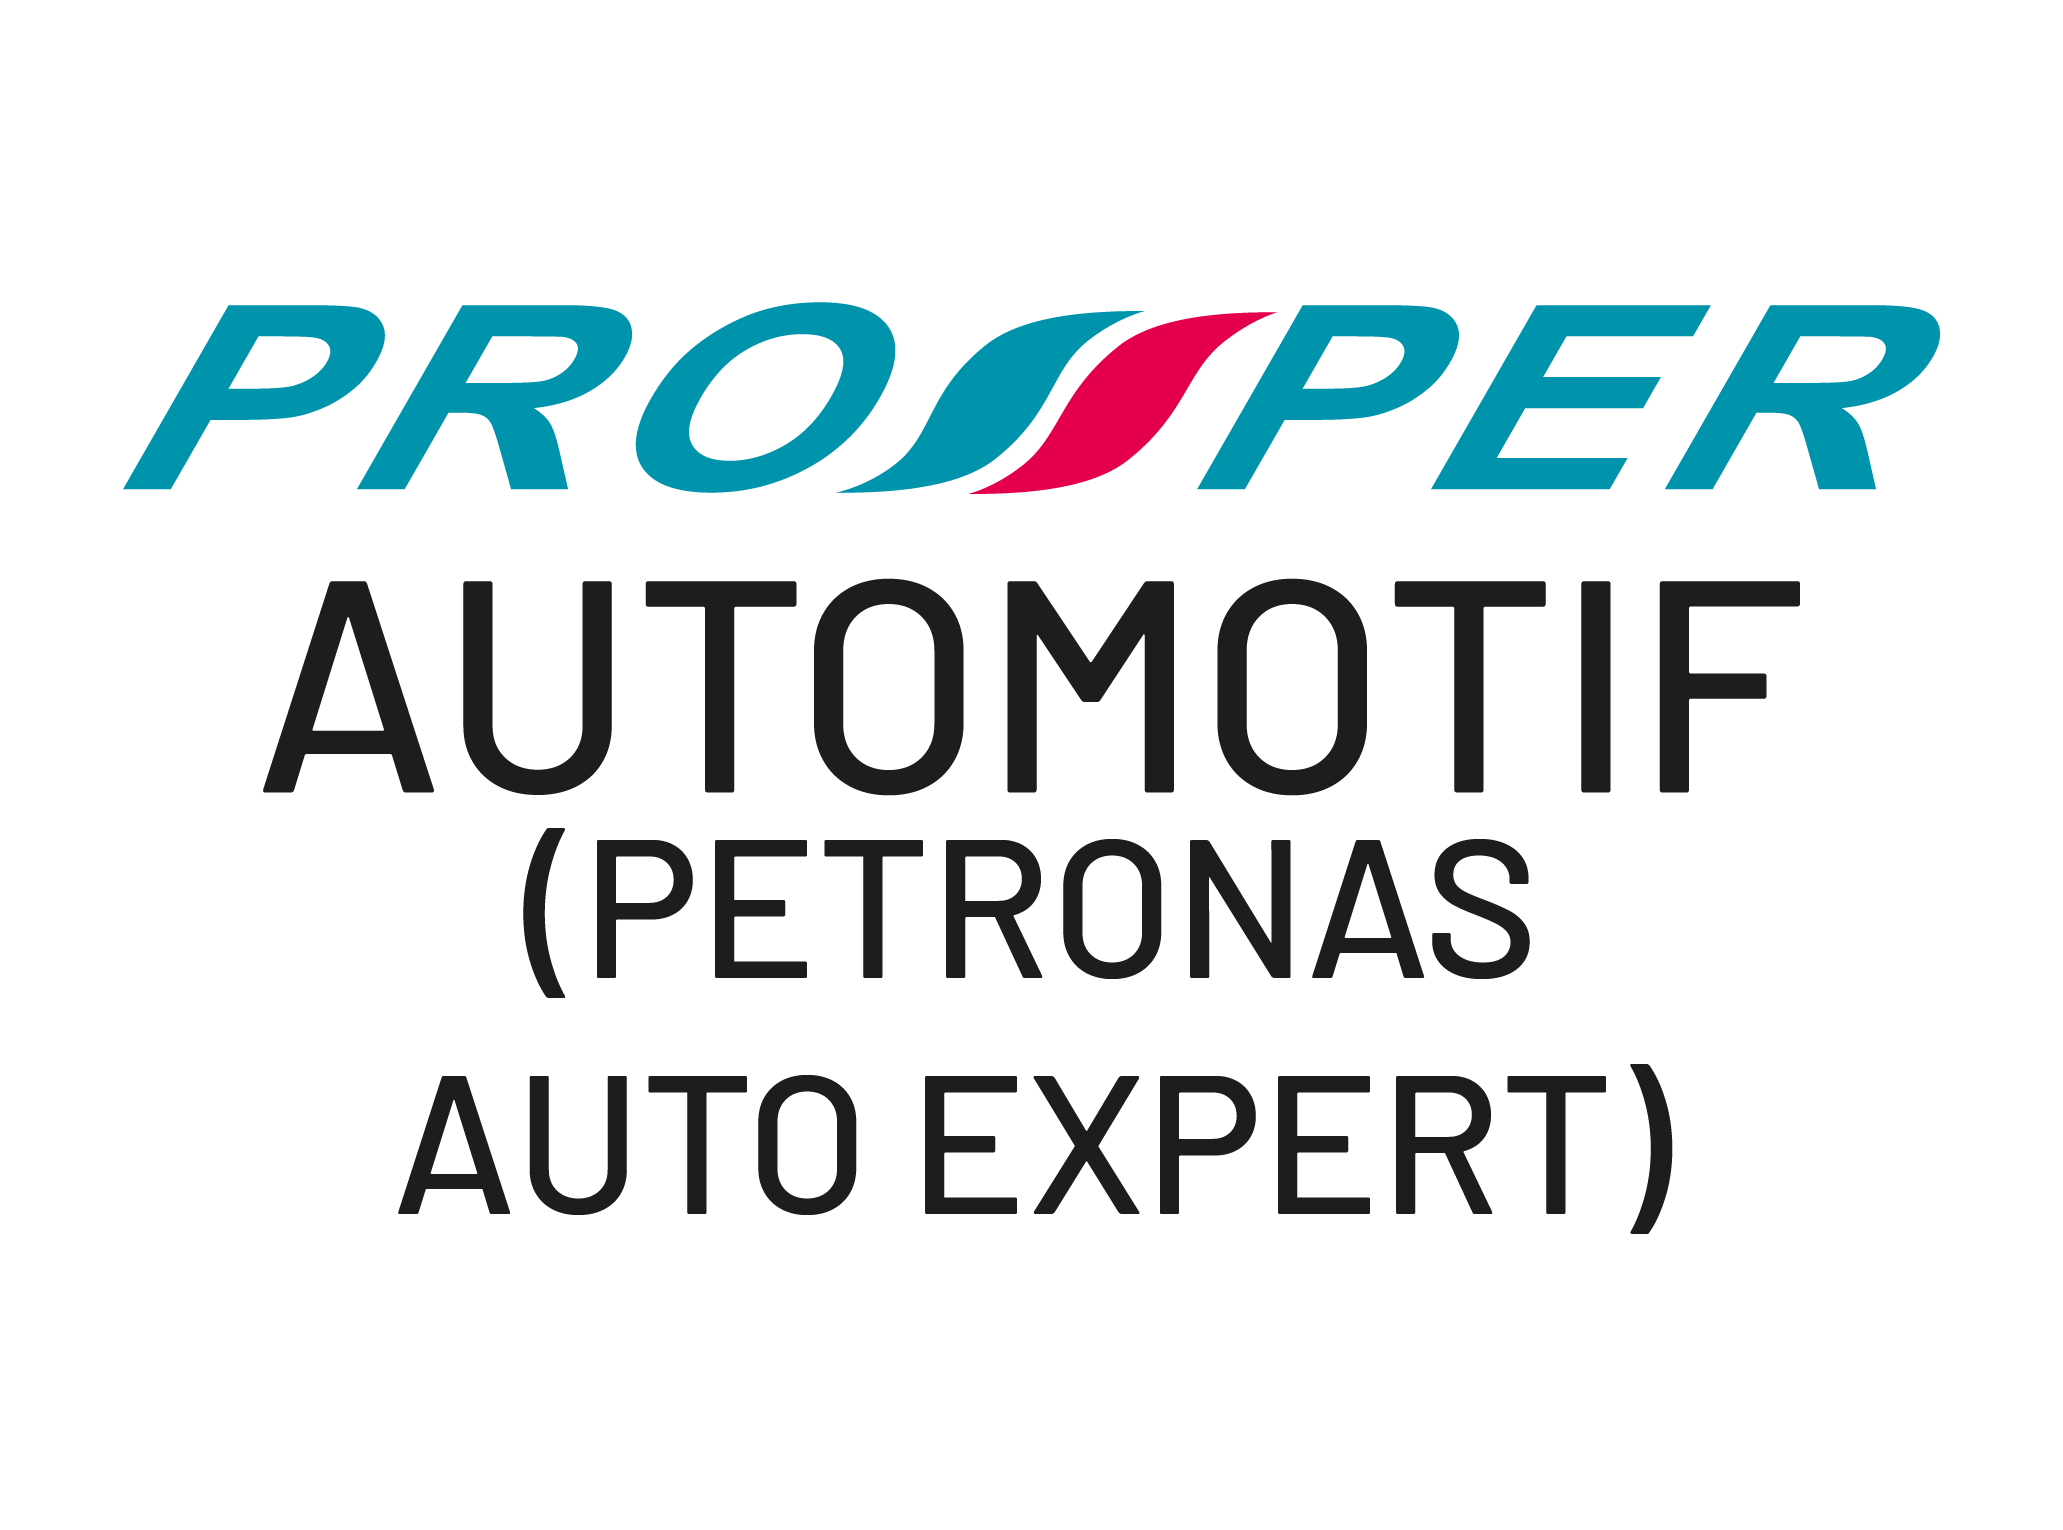 PROSPER Automotif - PETRONAS Auto Expert is a collaborative effort between PUNB and Petronas Lubricant Marketing (Malaysia) Sdn Bhd (Petronas) aimed at assisting appointed entrepreneurs in expanding their car workshop businesses under the Petronas Auto Expert brand. Under the program, Petronas provides training, promotion, development funding and business equipment to entrepreneurs.